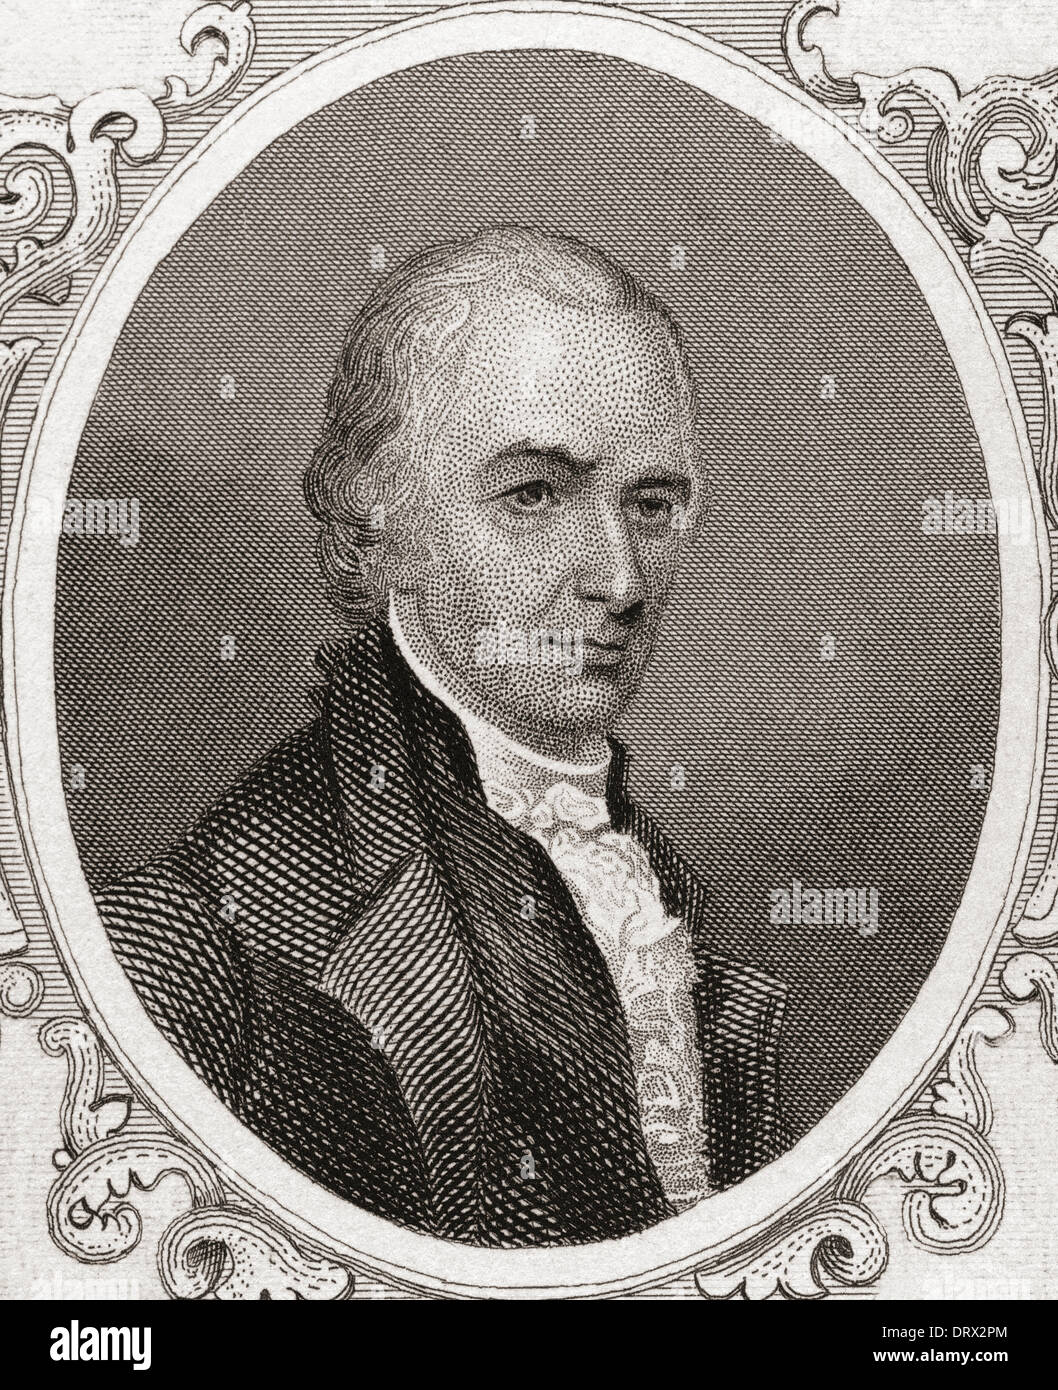 Alexander Hamilton, 1755/1757 – 1804. Founding Father of the United States and 1st Secretary of the Treasury. Stock Photo